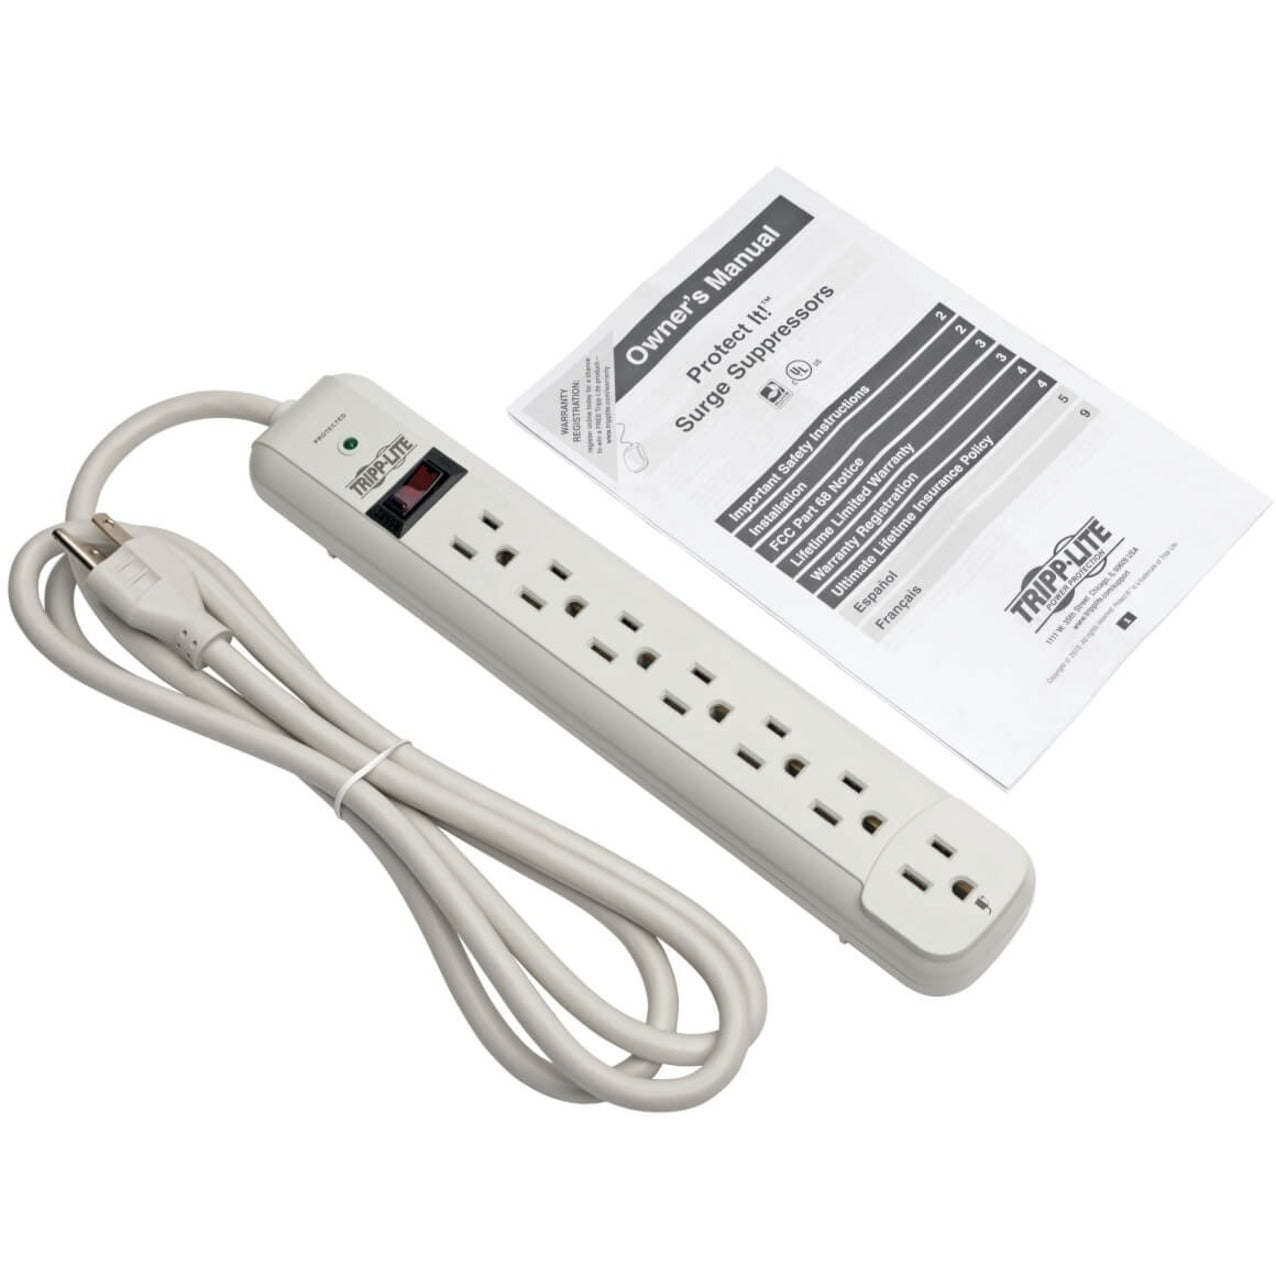 Tripp Lite Protect It! 7-Outlet Surge Protector 6 ft. Cord 1080 Joules Diagnostic LED Light Gray Housing